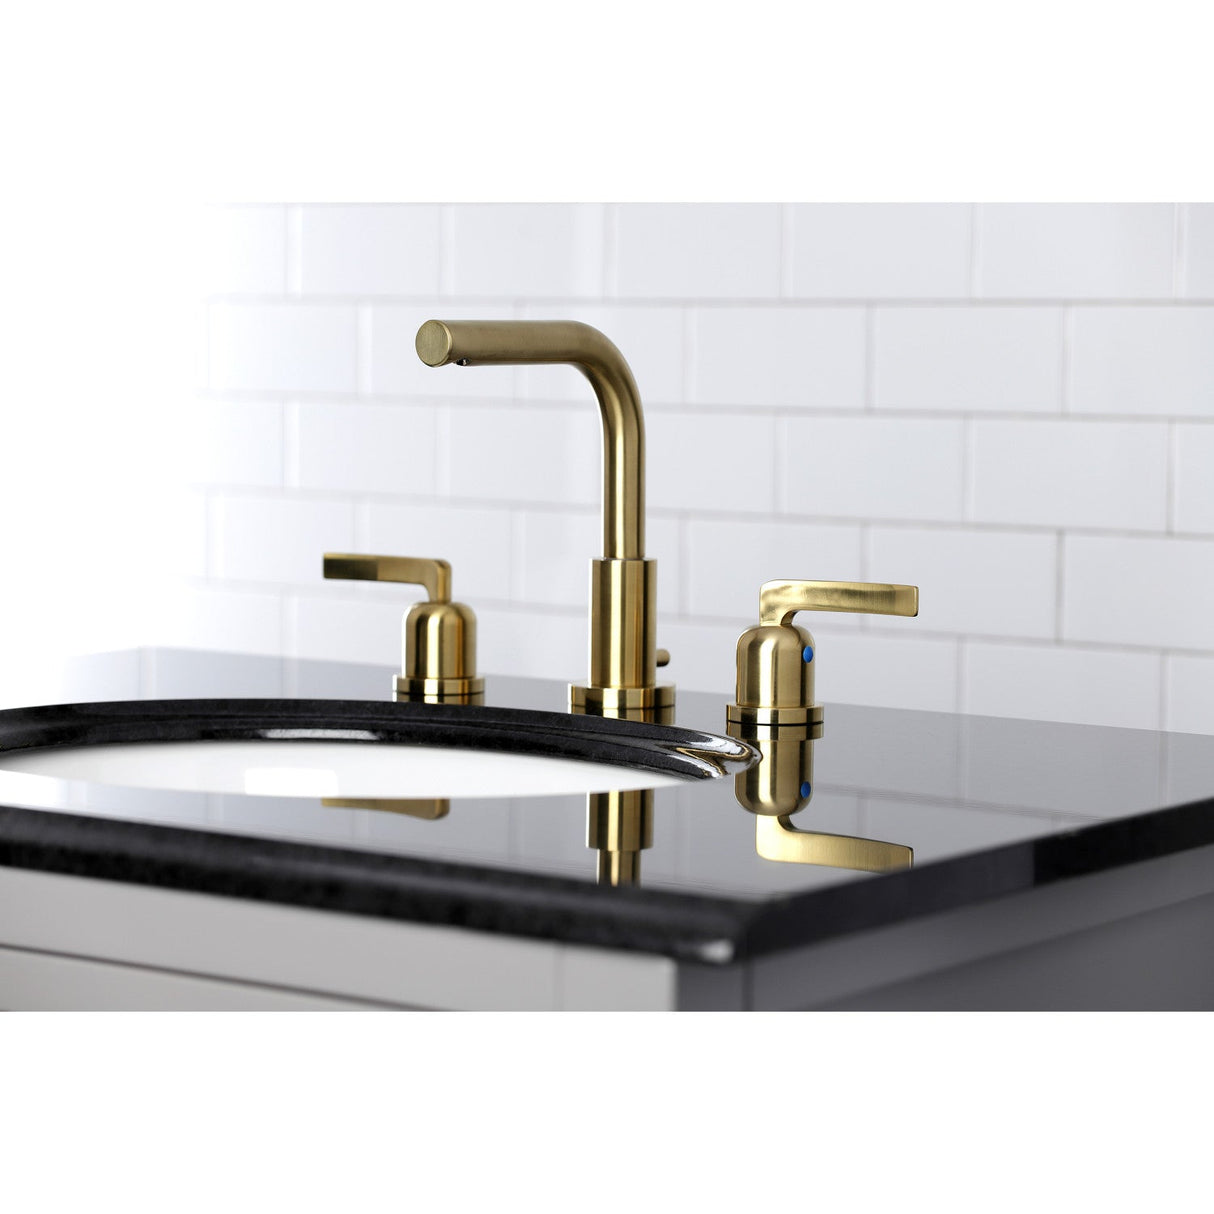 Centurion FSC8953EFL Two-Handle 3-Hole Deck Mount Widespread Bathroom Faucet with Pop-Up Drain, Brushed Brass